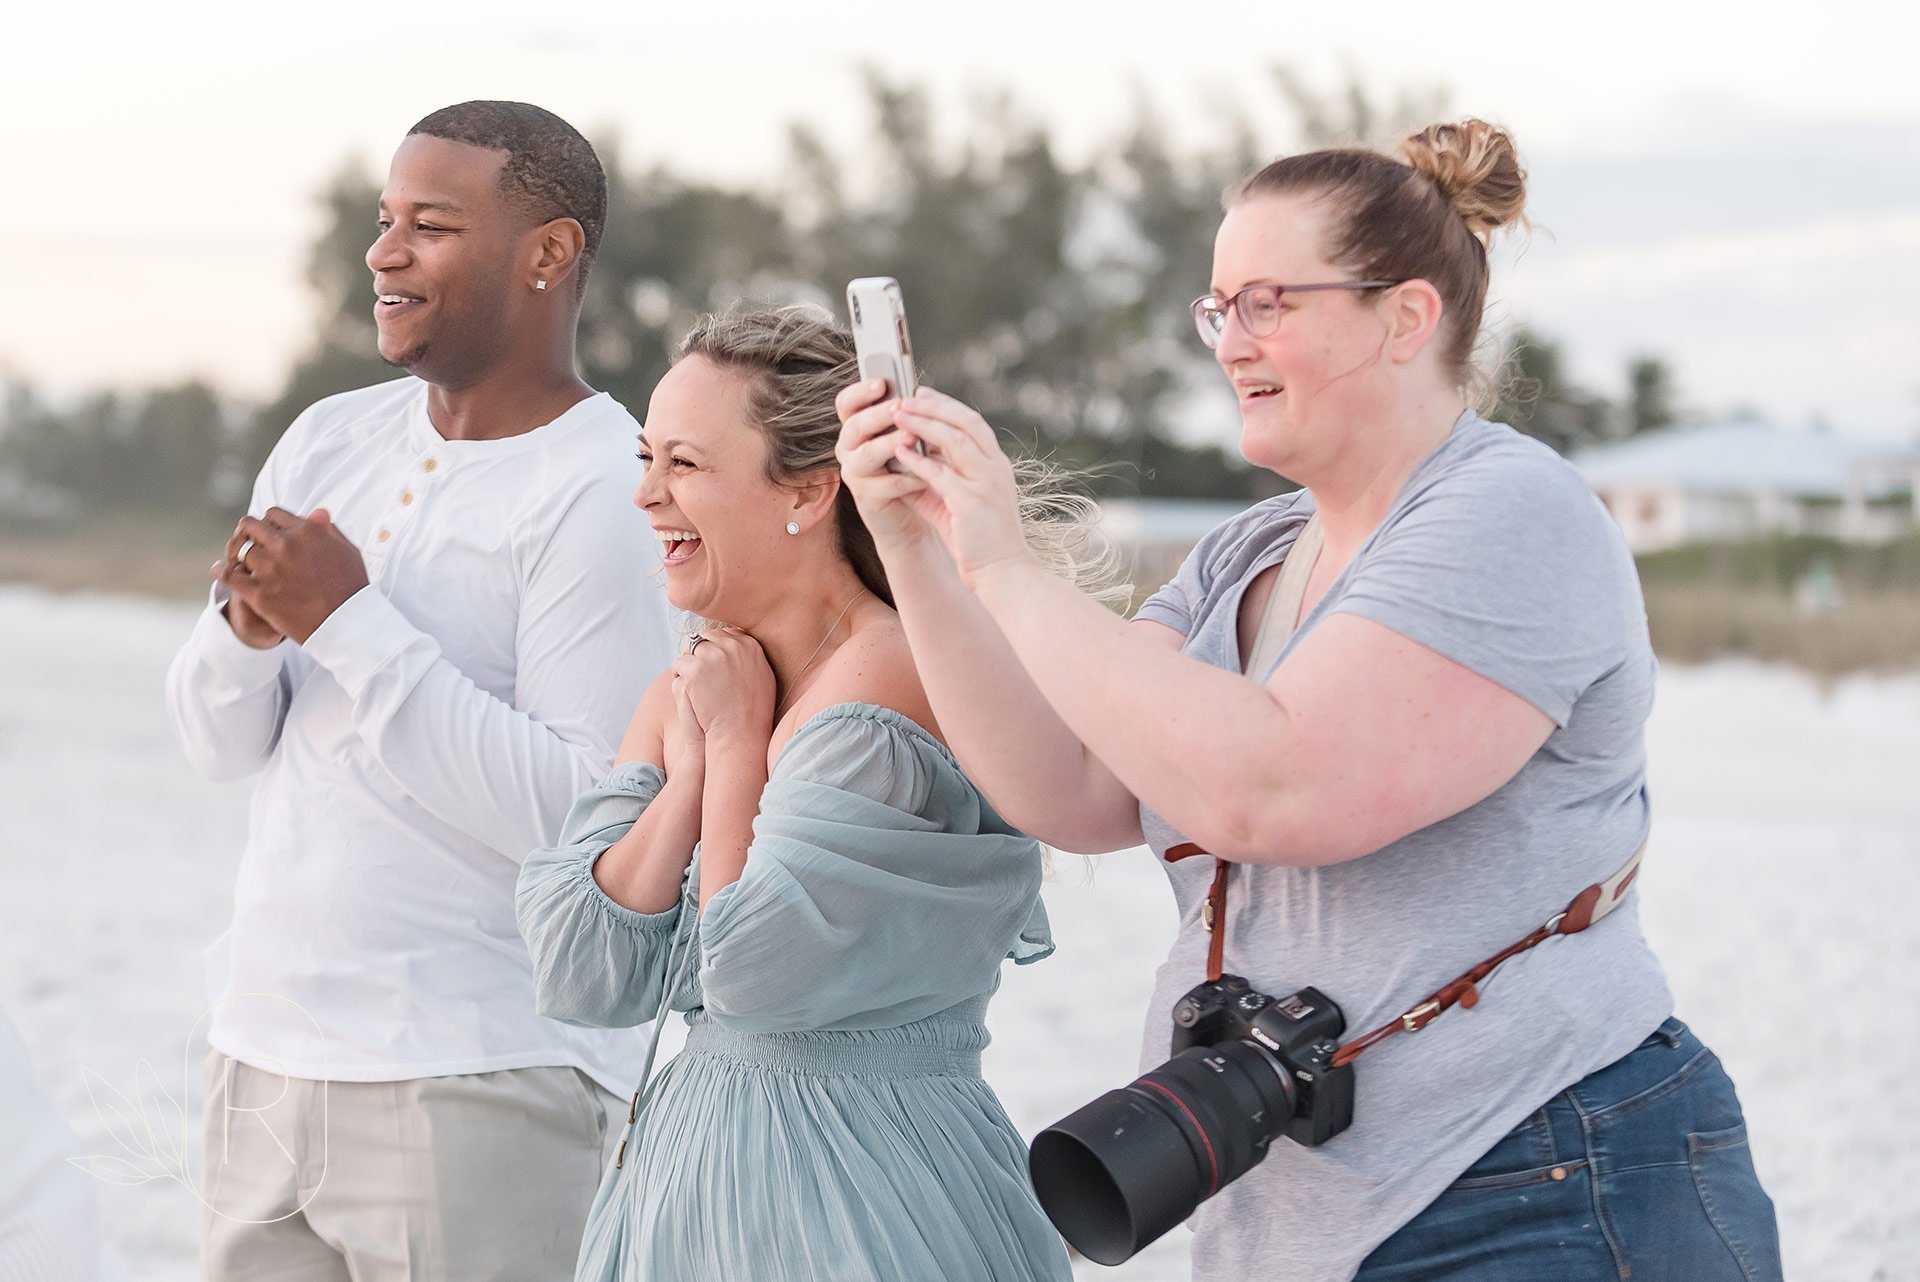 florida-photography-workshop-family-session-behind-the-scenes-cheering-Reflections-niagara-ontario.jpeg